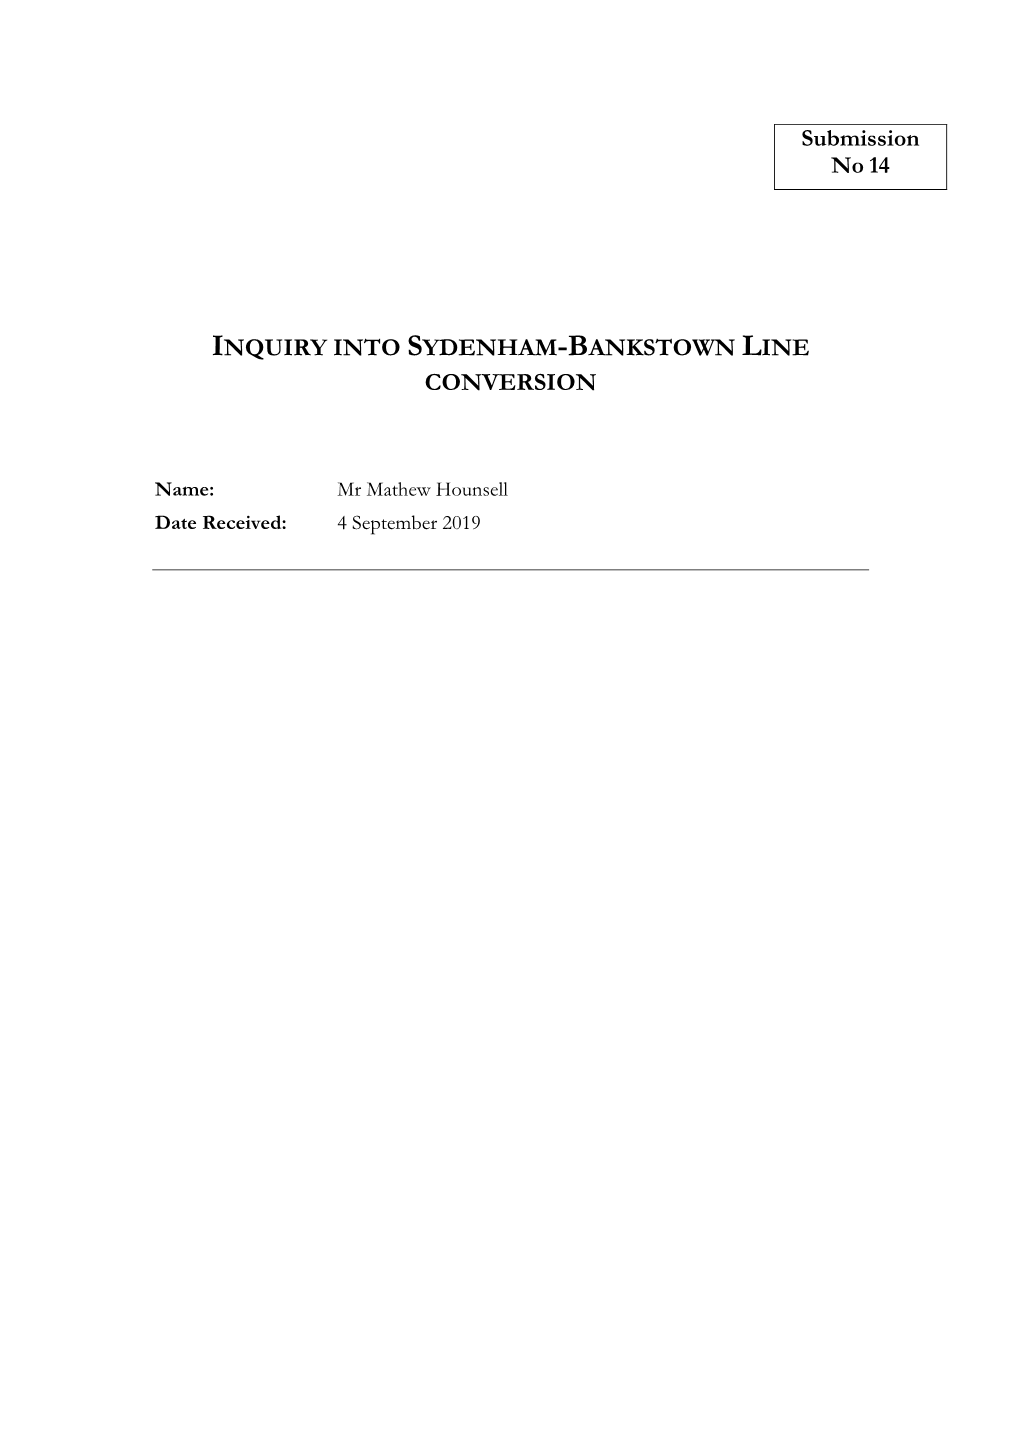 Submission No 14 INQUIRY INTO SYDENHAM-BANKSTOWN LINE